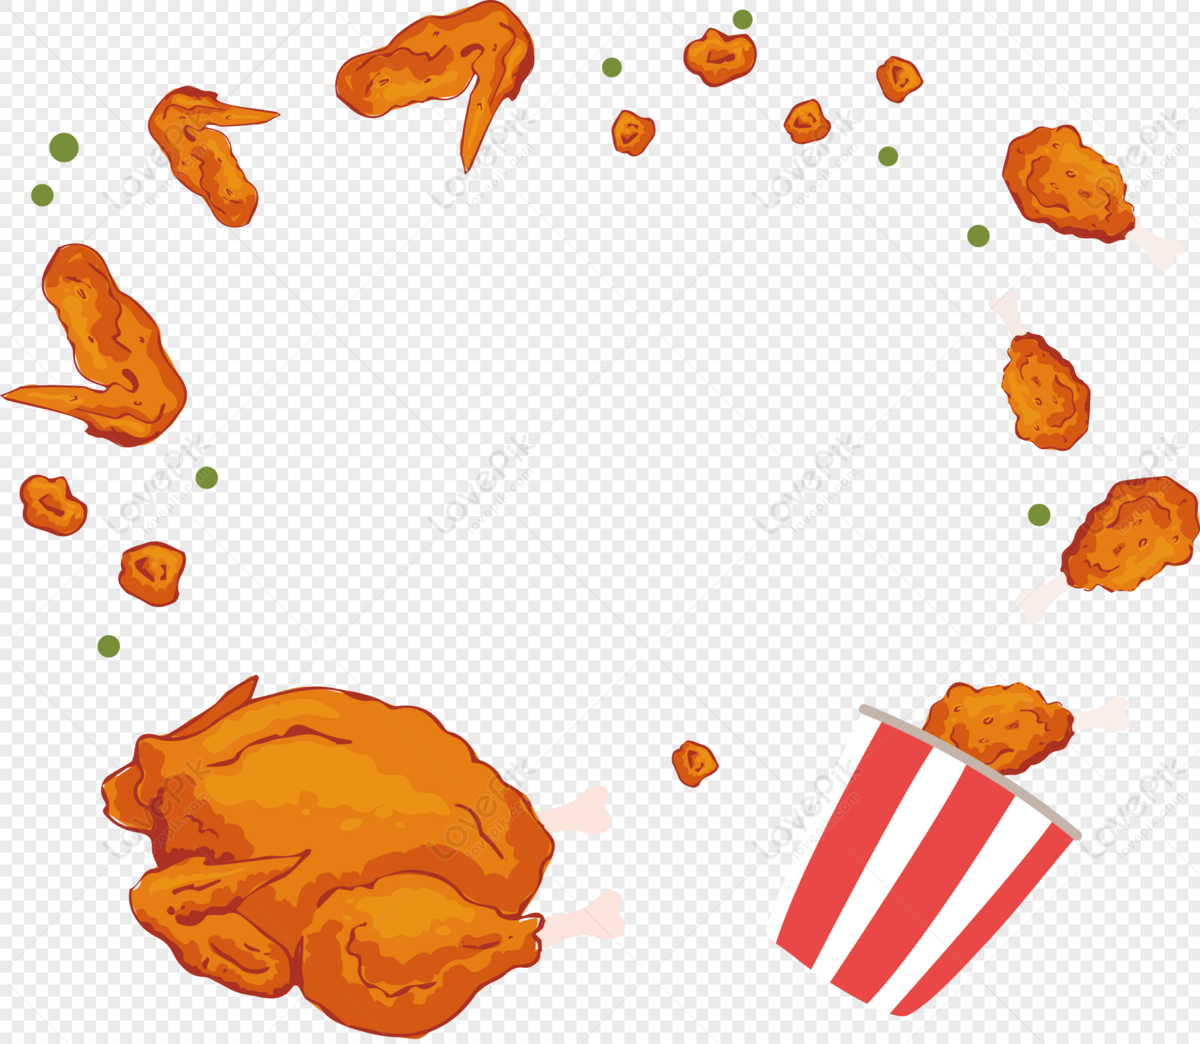 Fried Chicken PNG Picture And Clipart Image For Free Download - Lovepik |  400526175